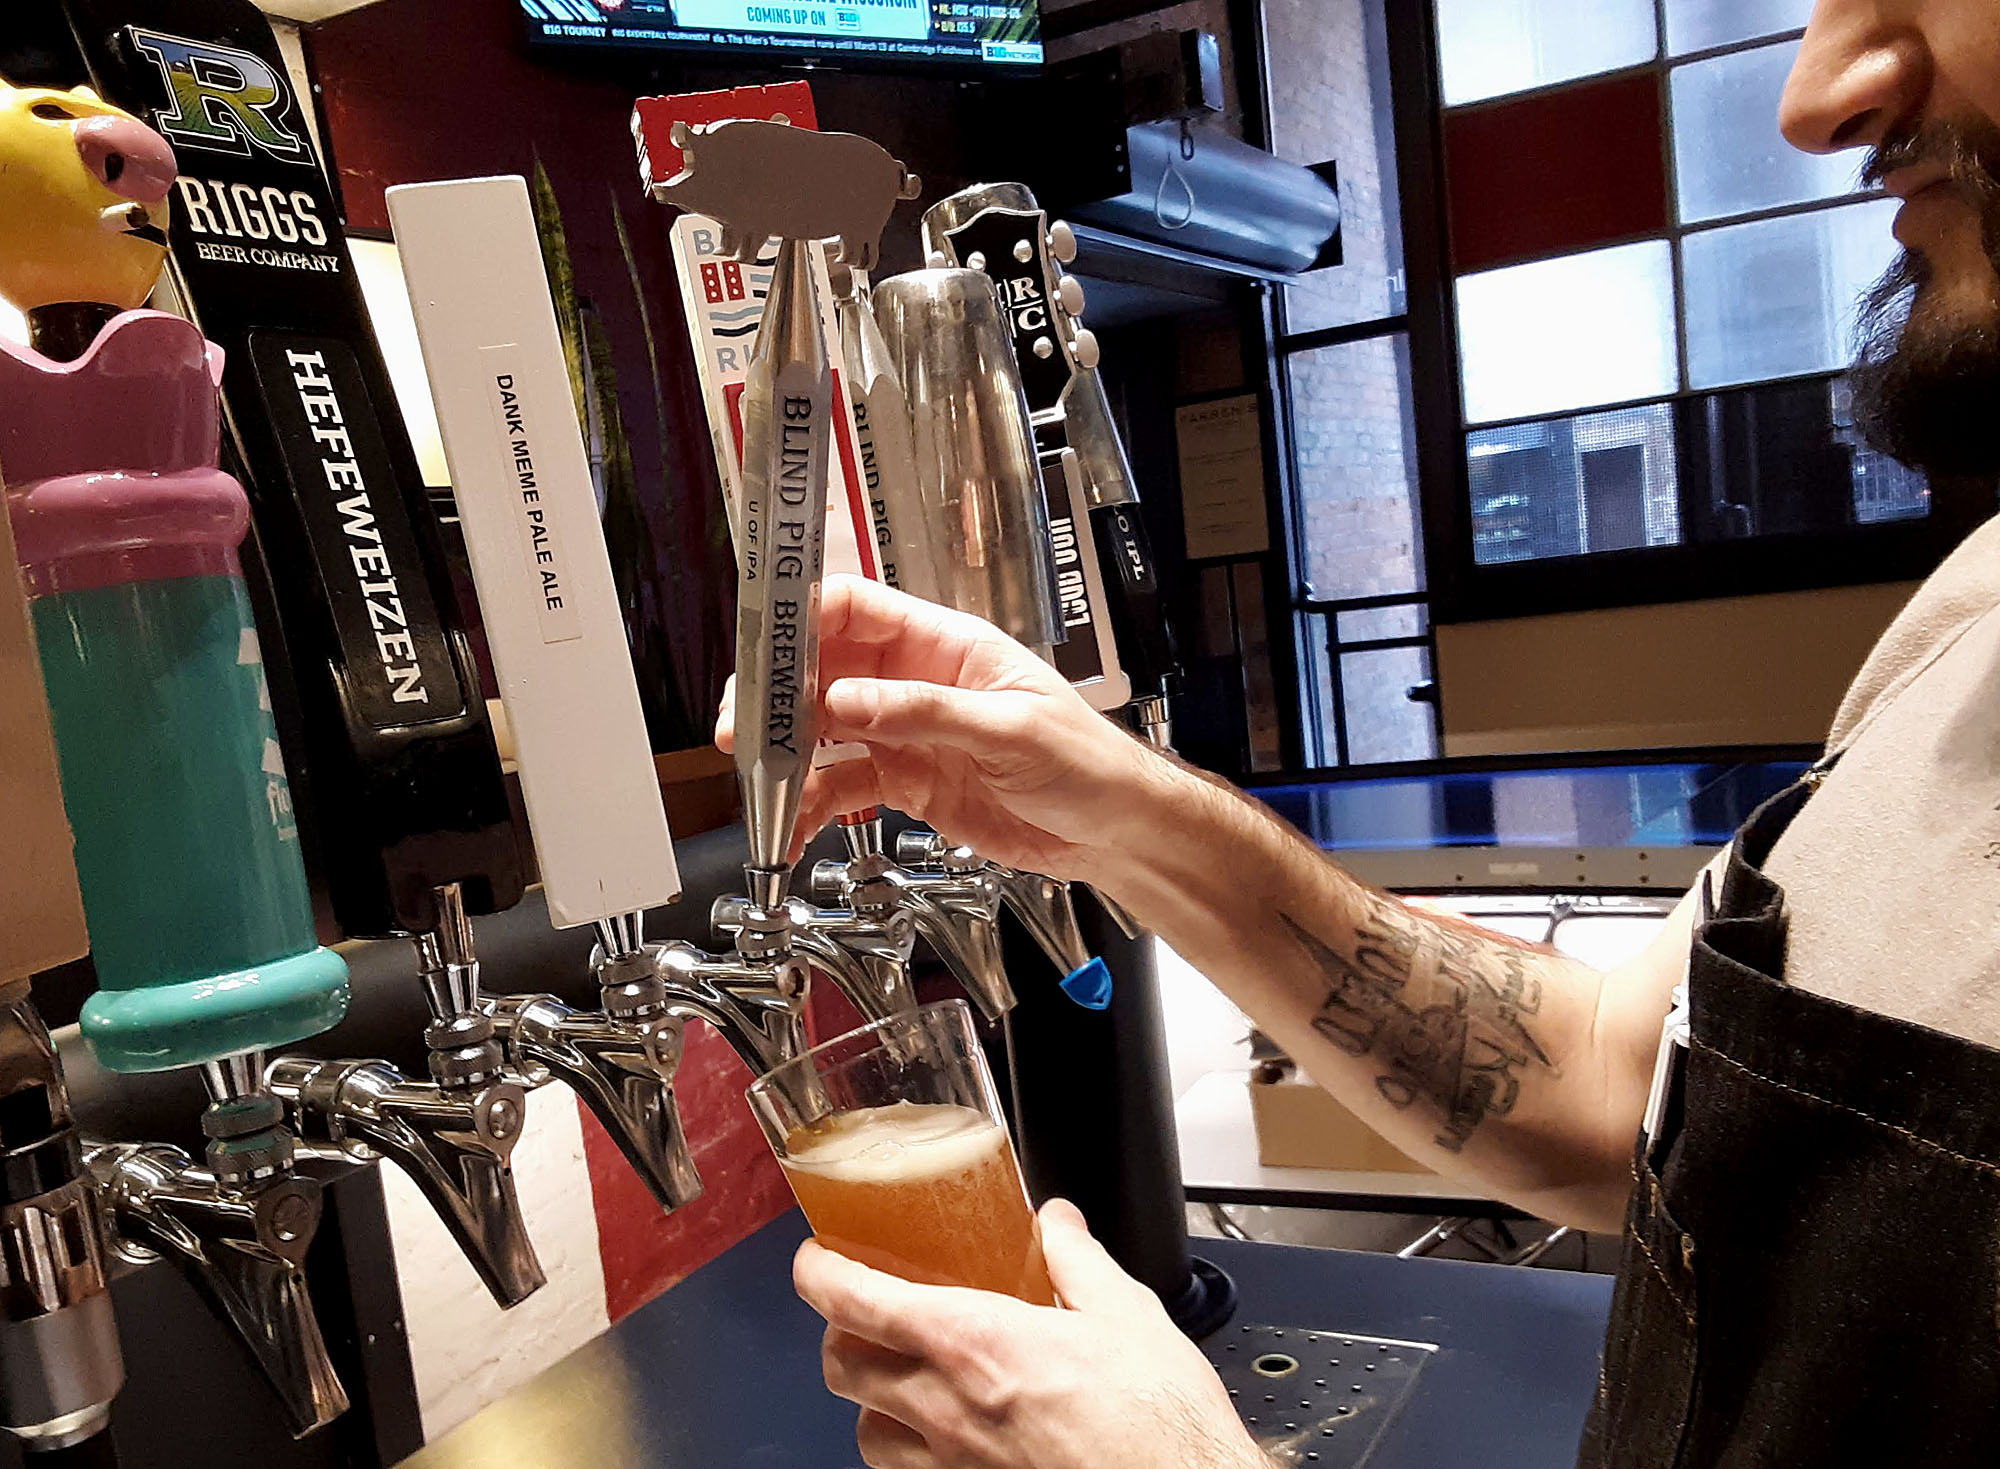 Terry Boyer at Farren's Pub pours beer from a draft tap. Photo by Paul Young.